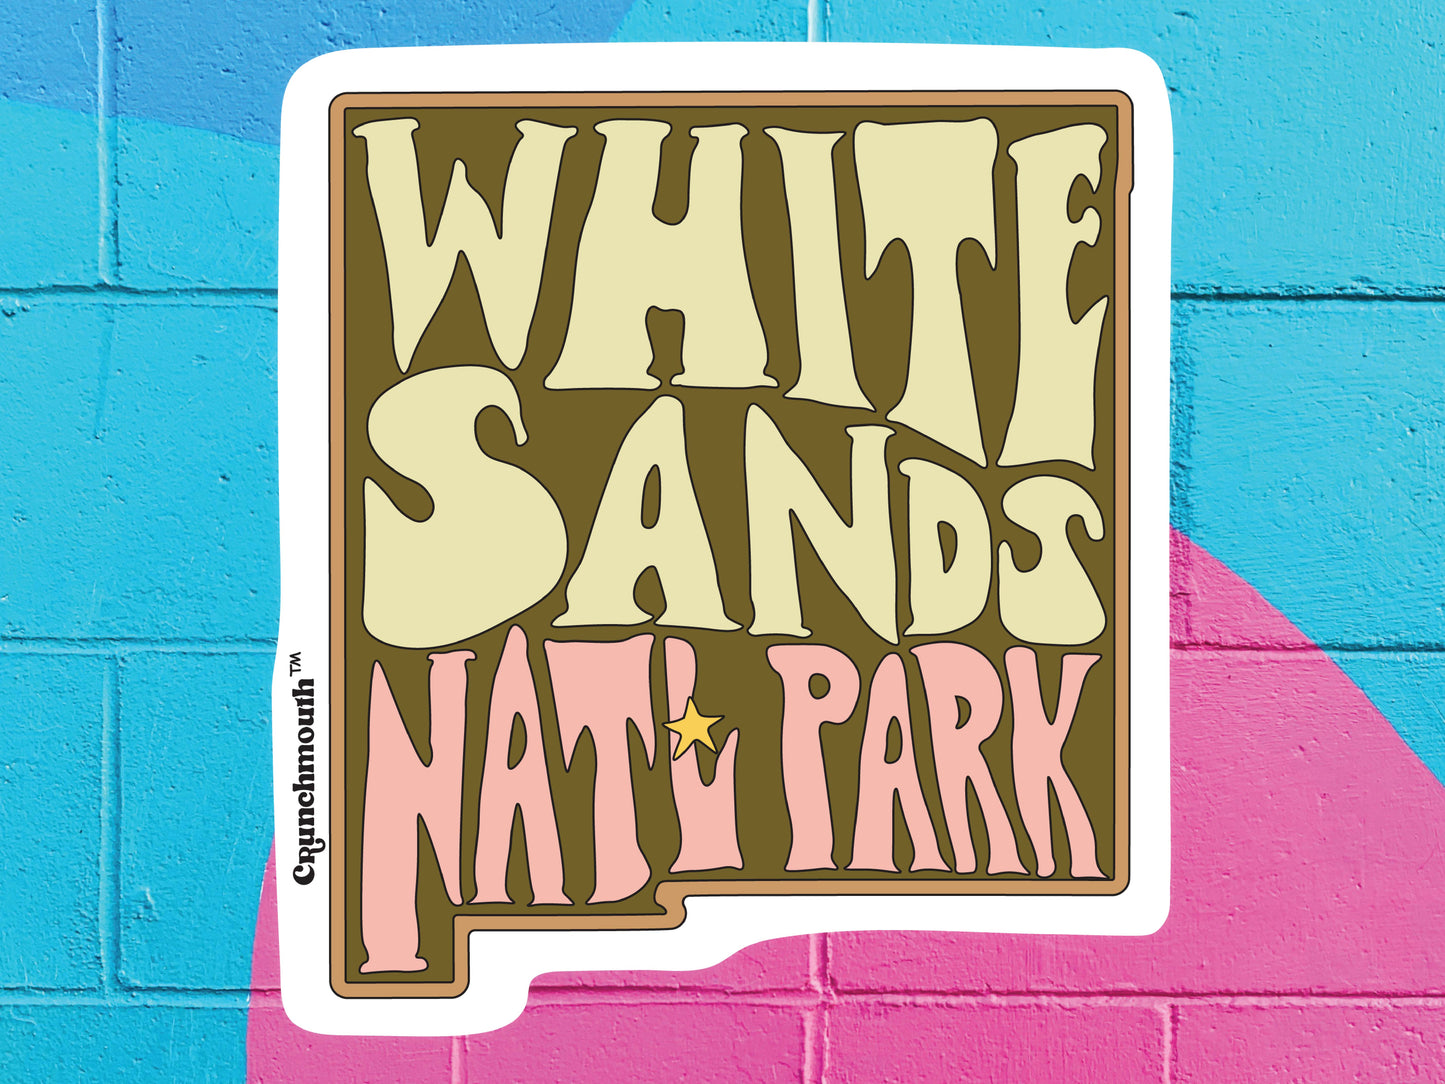 white sands national park new mexico sticker, colorful cinder block wall background